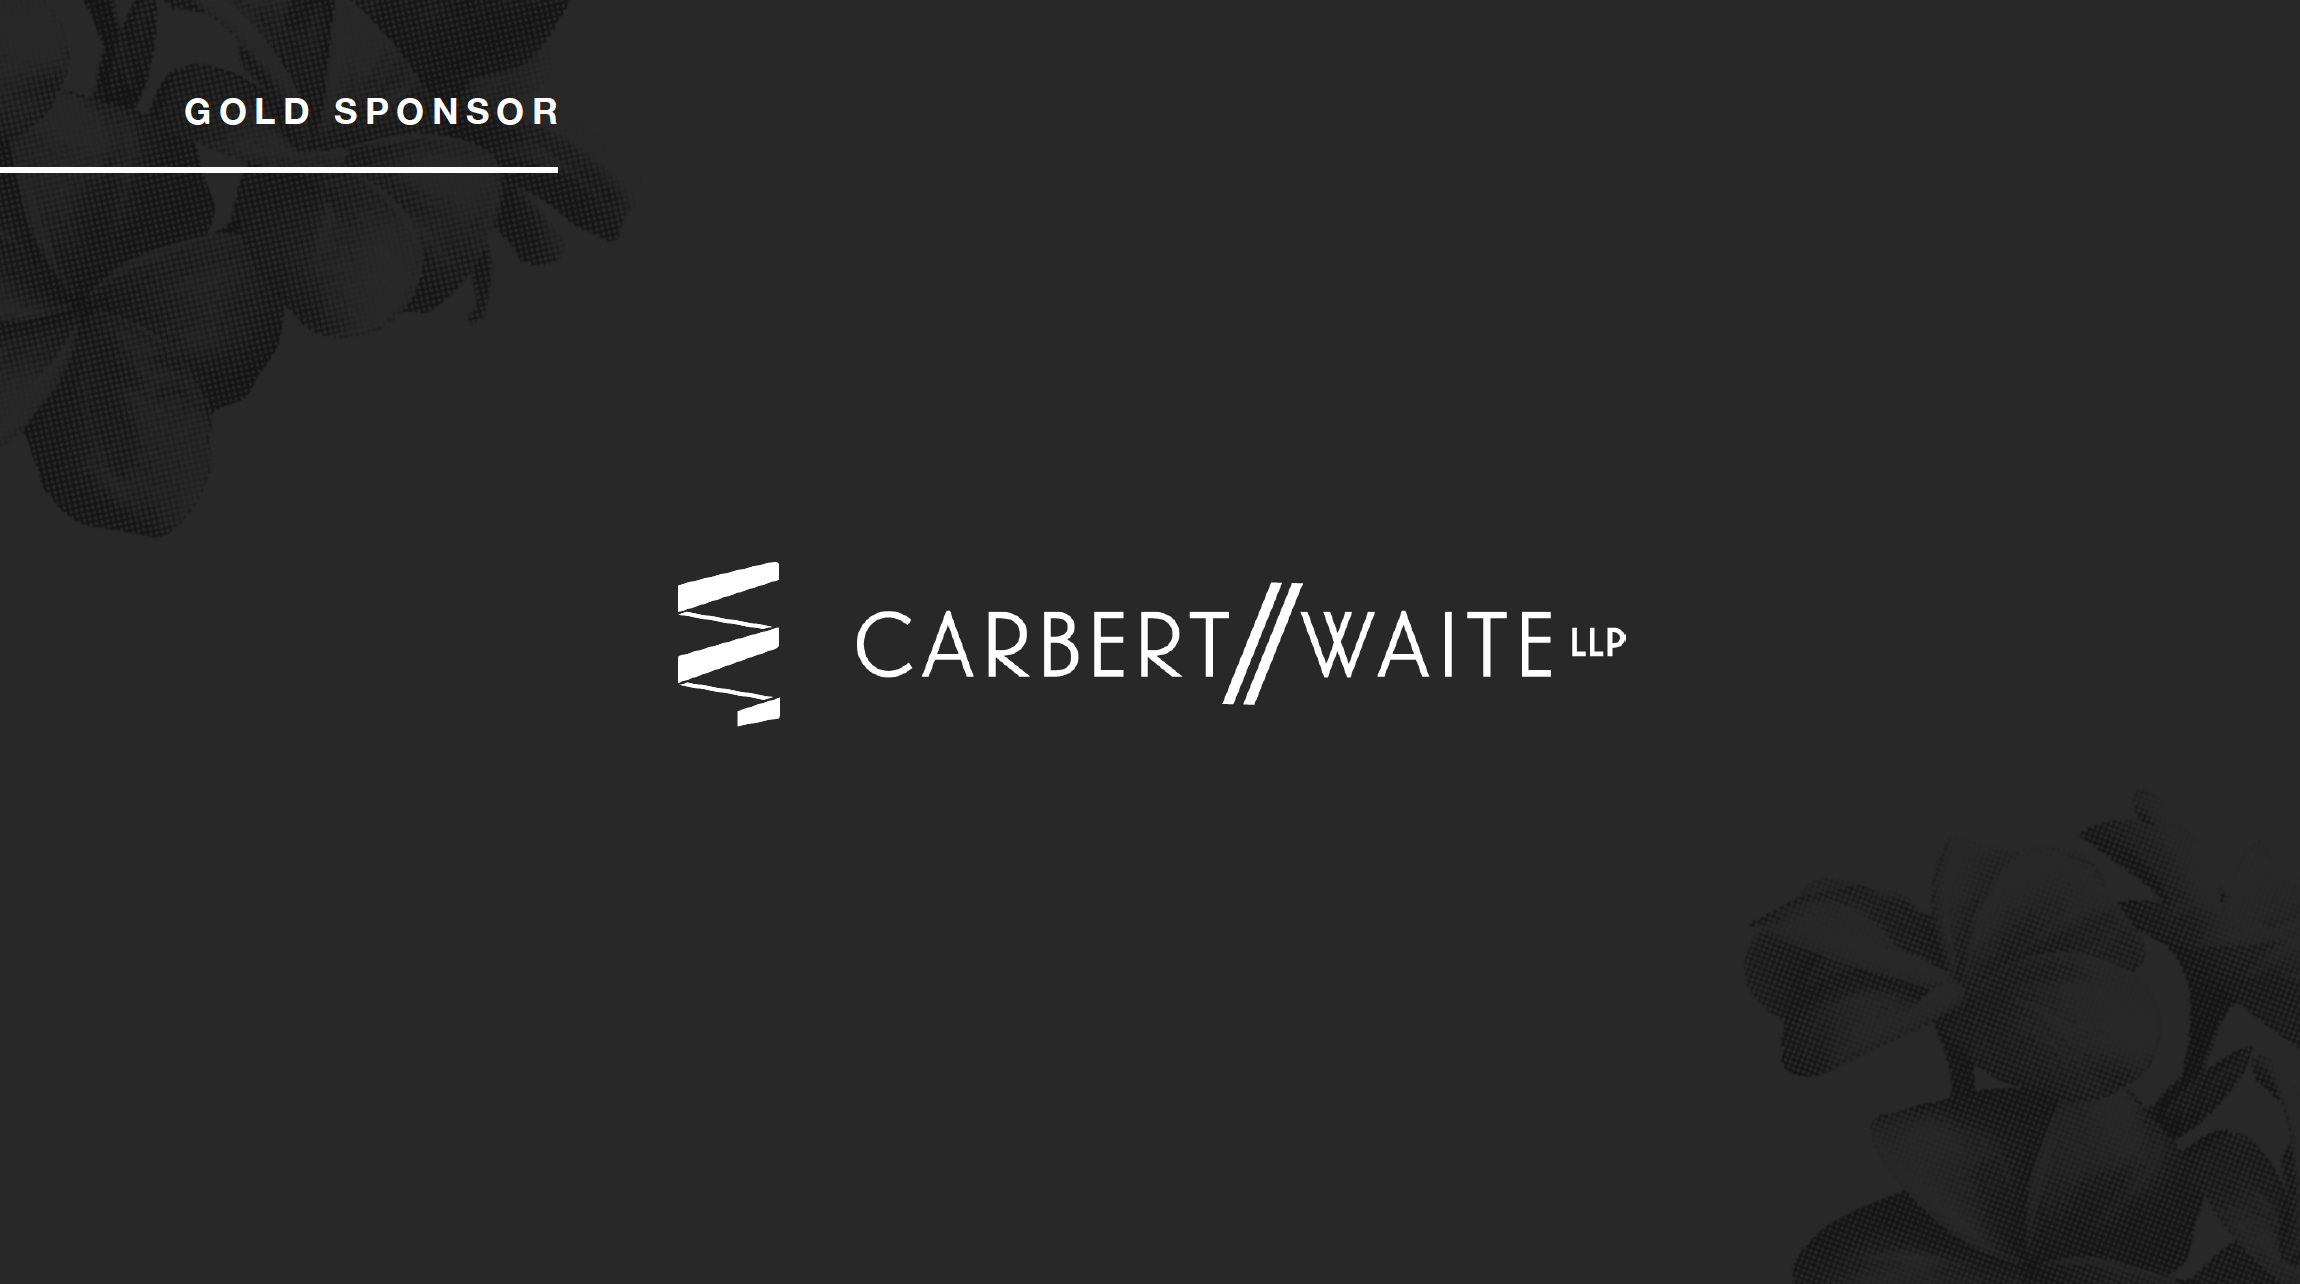 Featured image for “Carbert Waite LLP – Gold Sponsor”